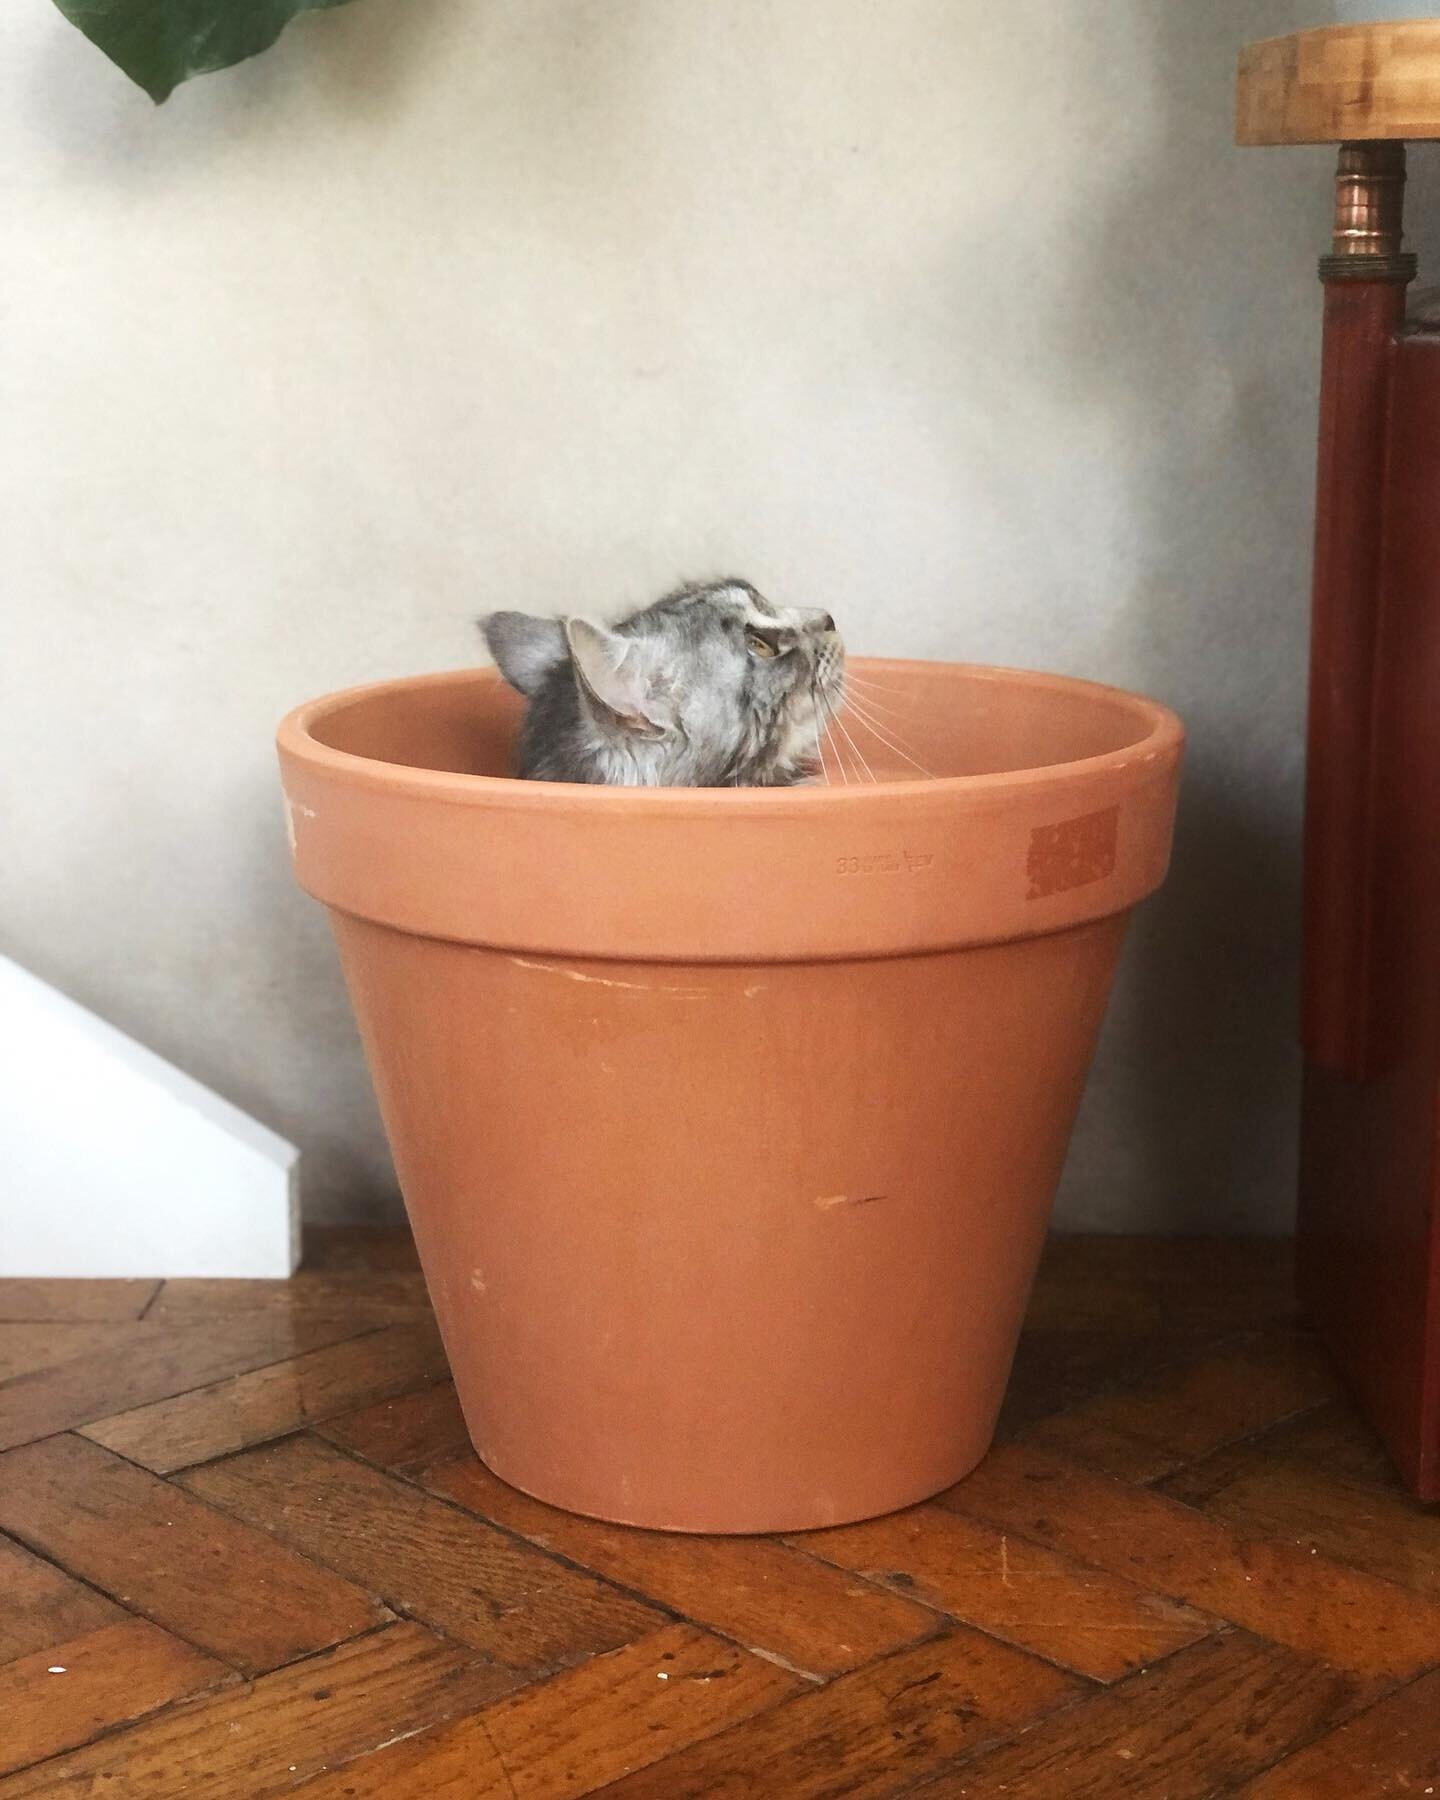 This photo needs a caption 🤔, any suggestions gratefully received 🙏🏽

Noodle was clearly posing in a pot for a reason, but I haven&rsquo;t figured out why ? 
.
.
.
.
.
.

#instacat  #catladylife #catsbeingcats #catfluencer #catmomlife #ofsimplemat